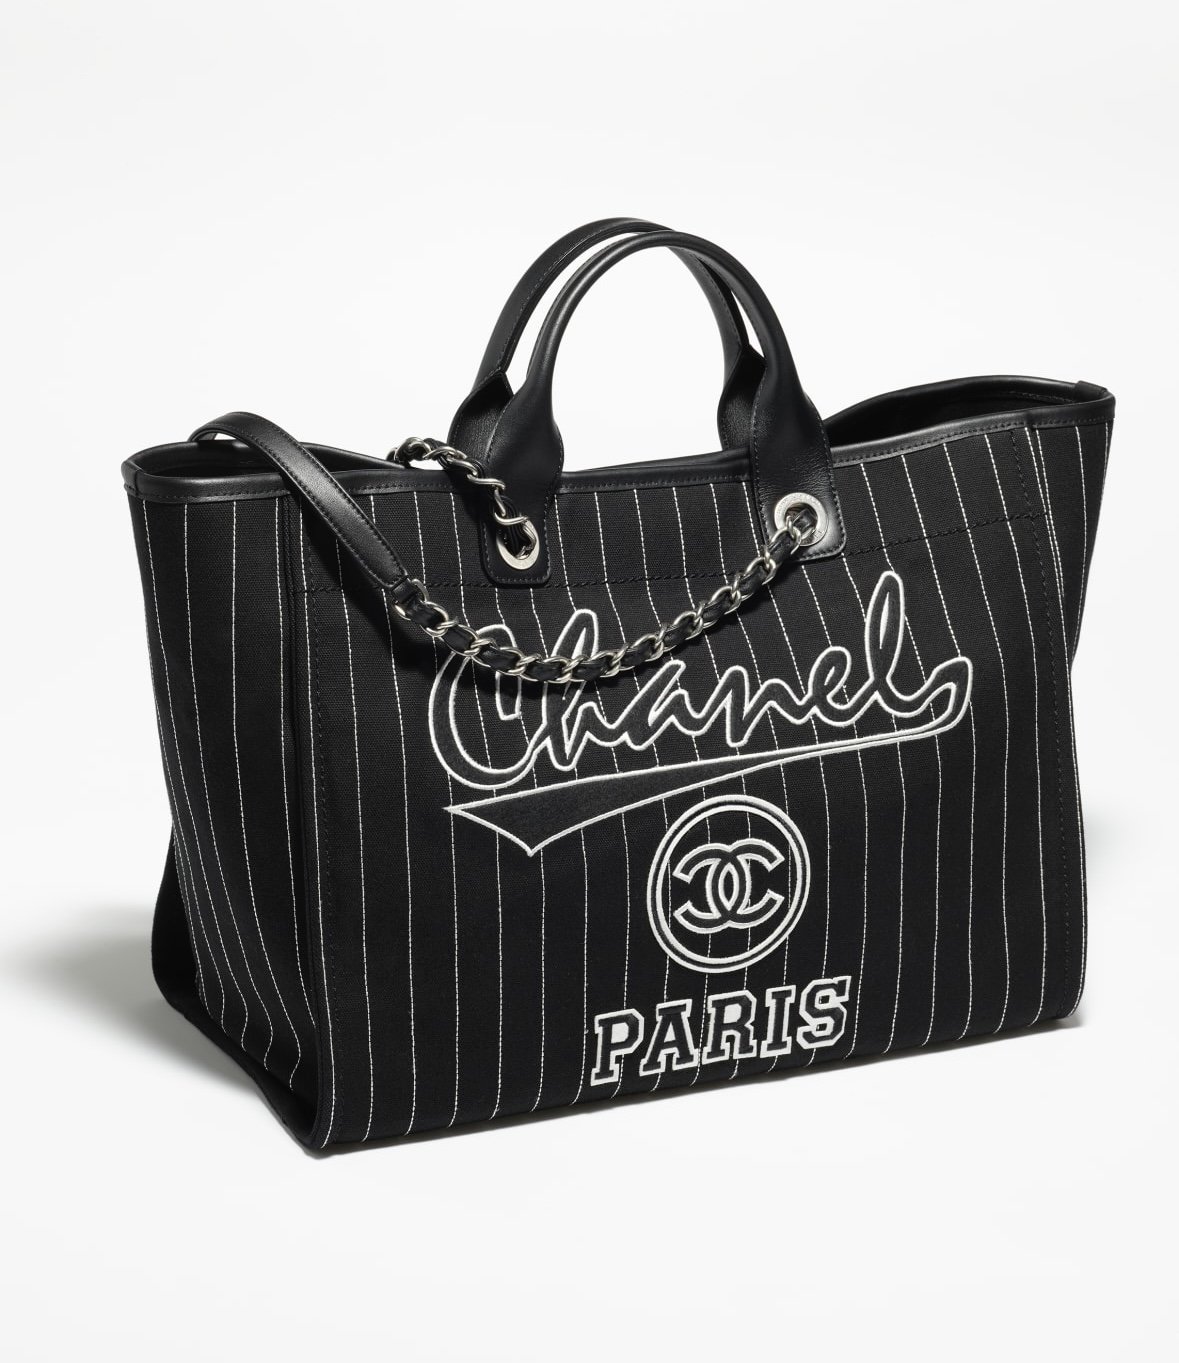 Shop CHANEL DEAUVILLE 2023 SS Totes  A93786 B10404 NN040 by Anela6  BUYMA